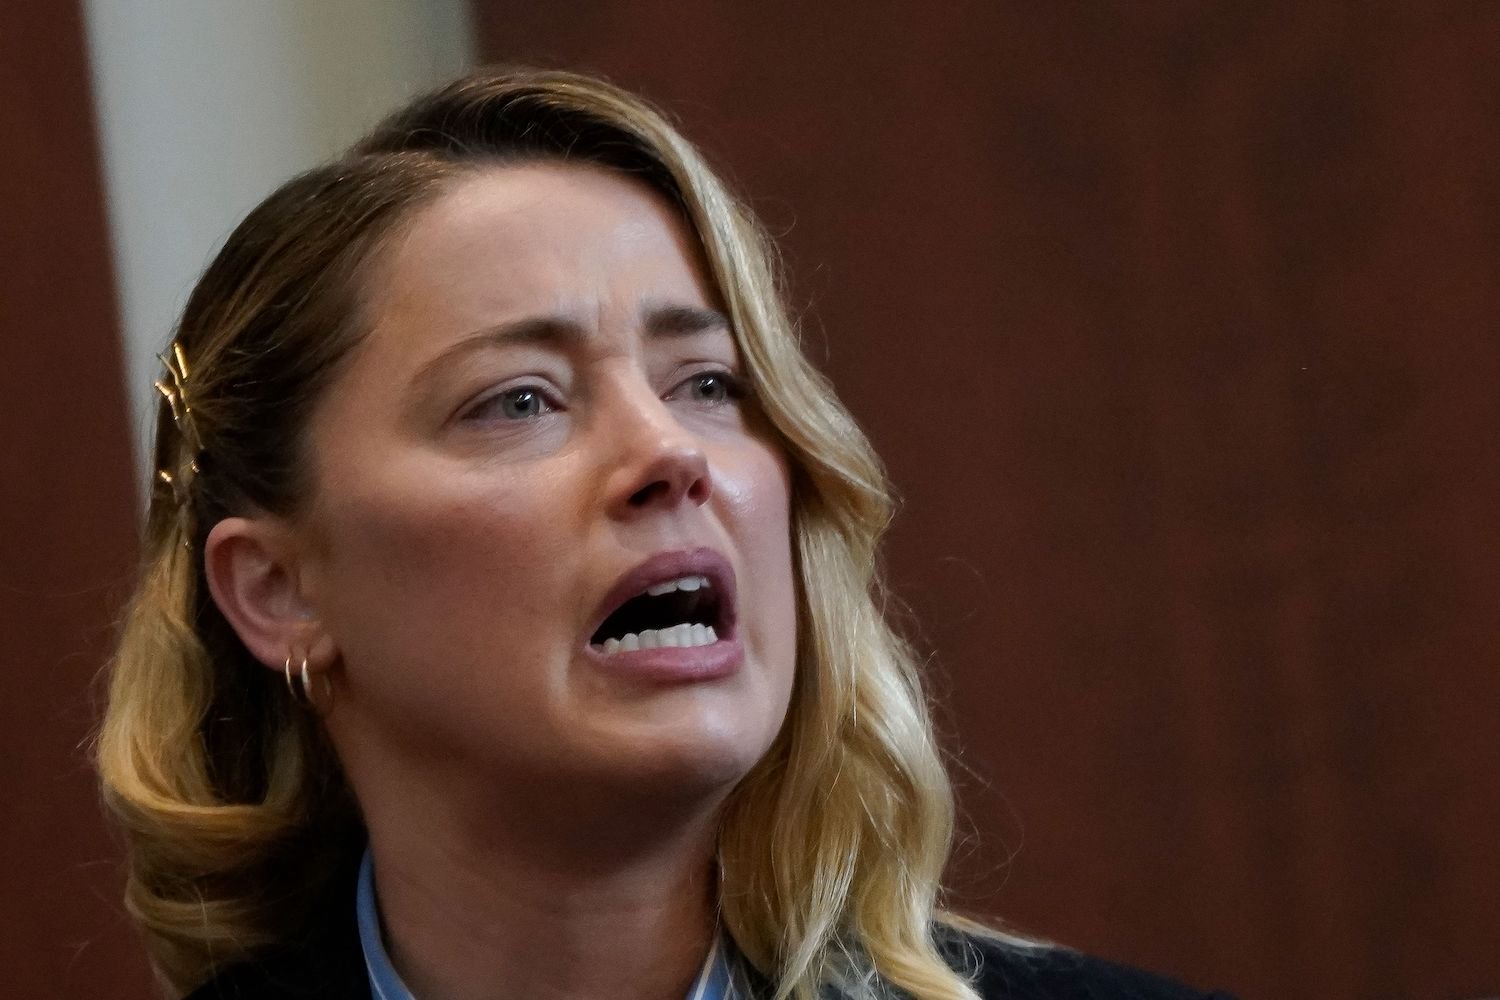 Amber Heard is emotional on the stand during Johnny Depp v. Amber Heard trial